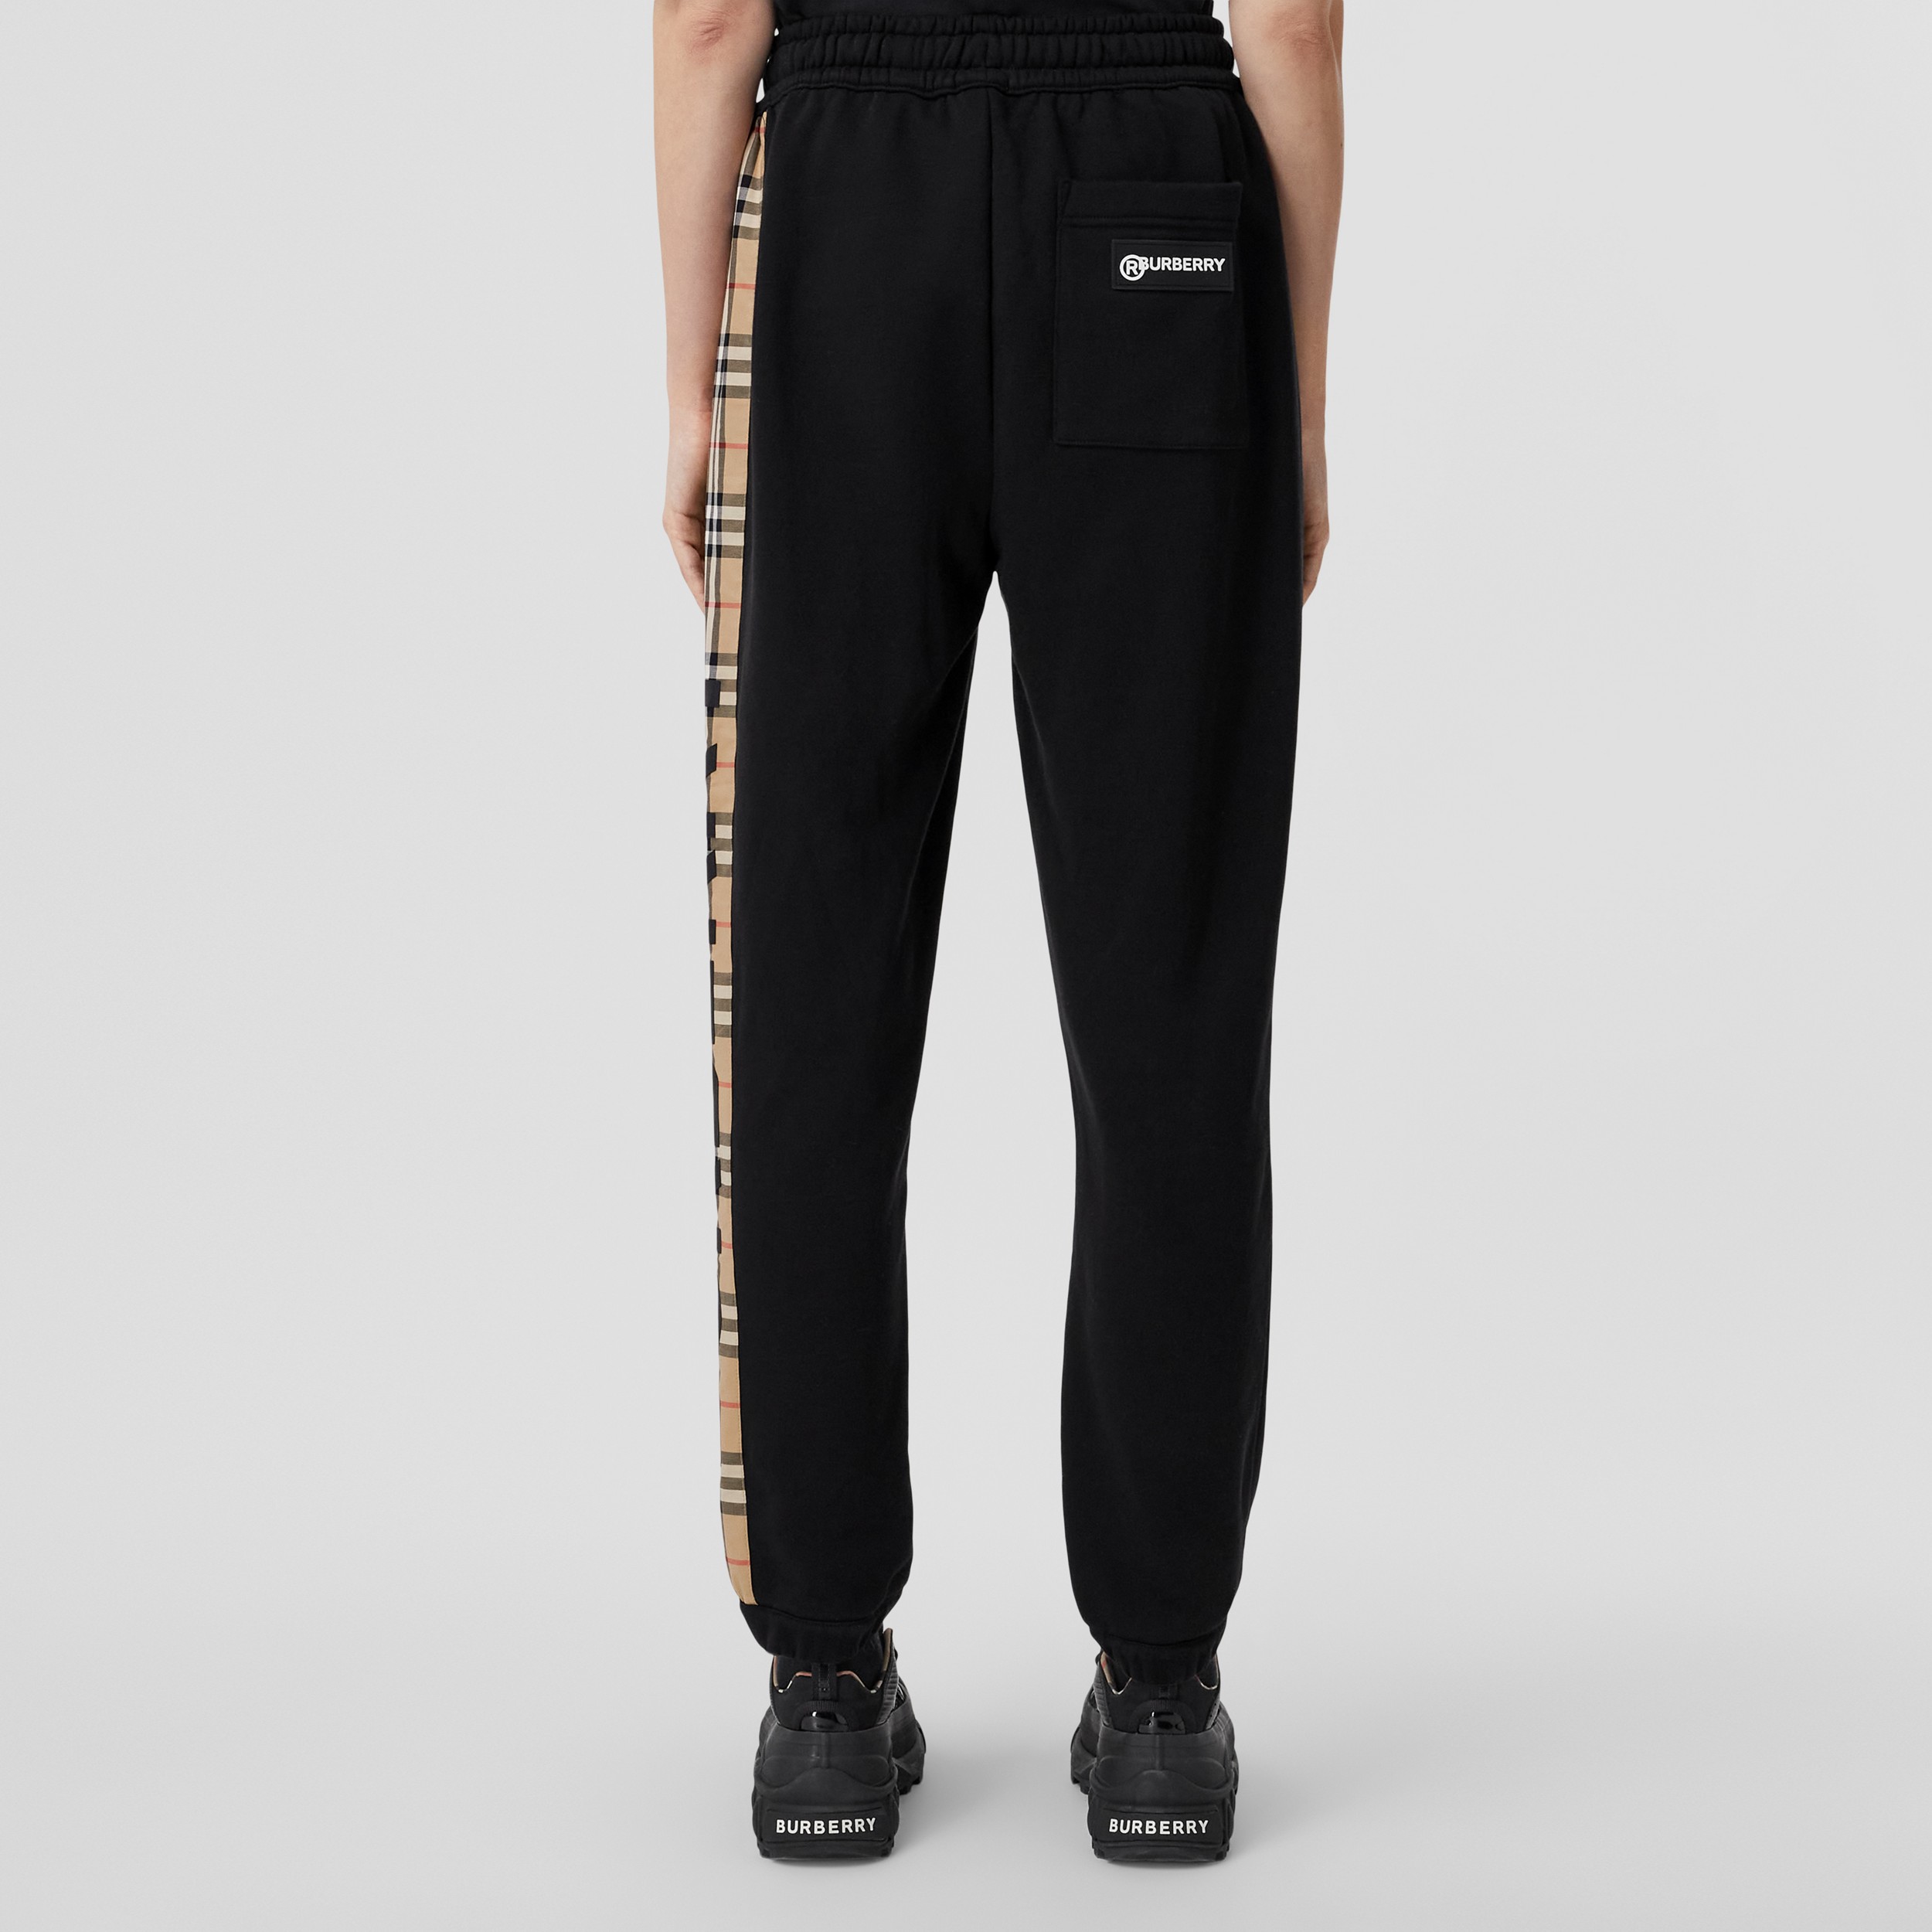 Womens Clothing Trousers Burberry Vintage Check Cotton Sweatpants in Black Slacks and Chinos Full-length trousers 